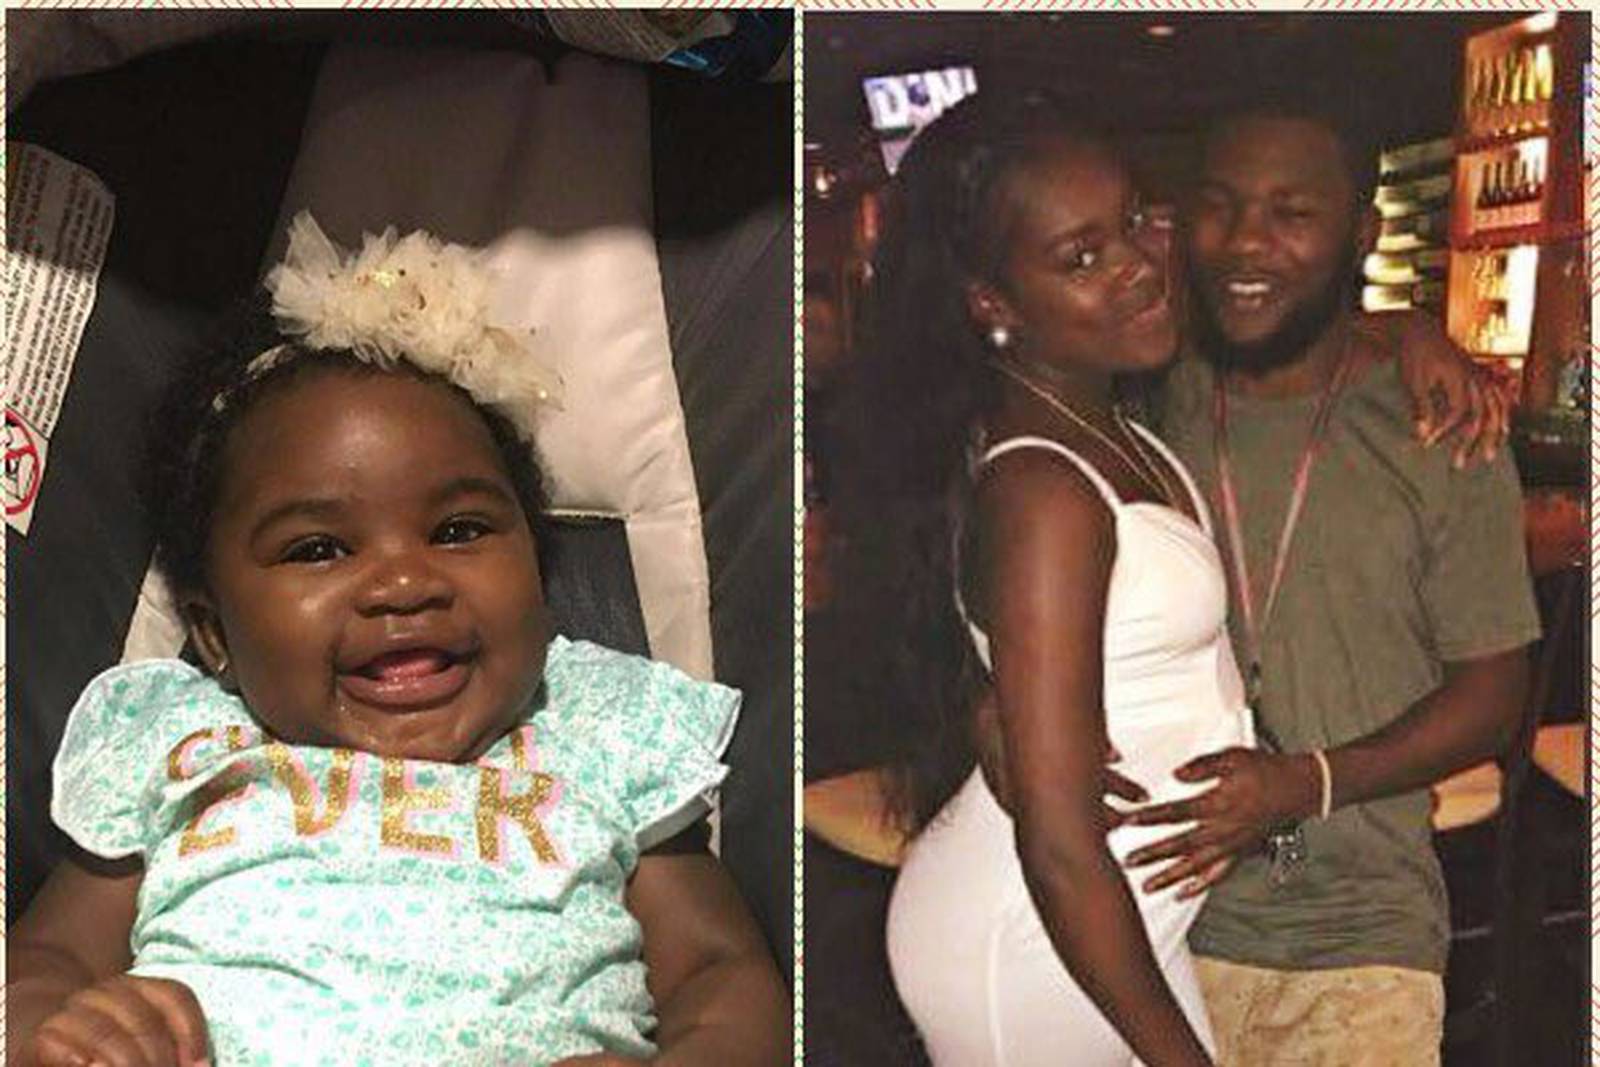 No arrests 1 month after Jacksonville murder of young parents, their ...